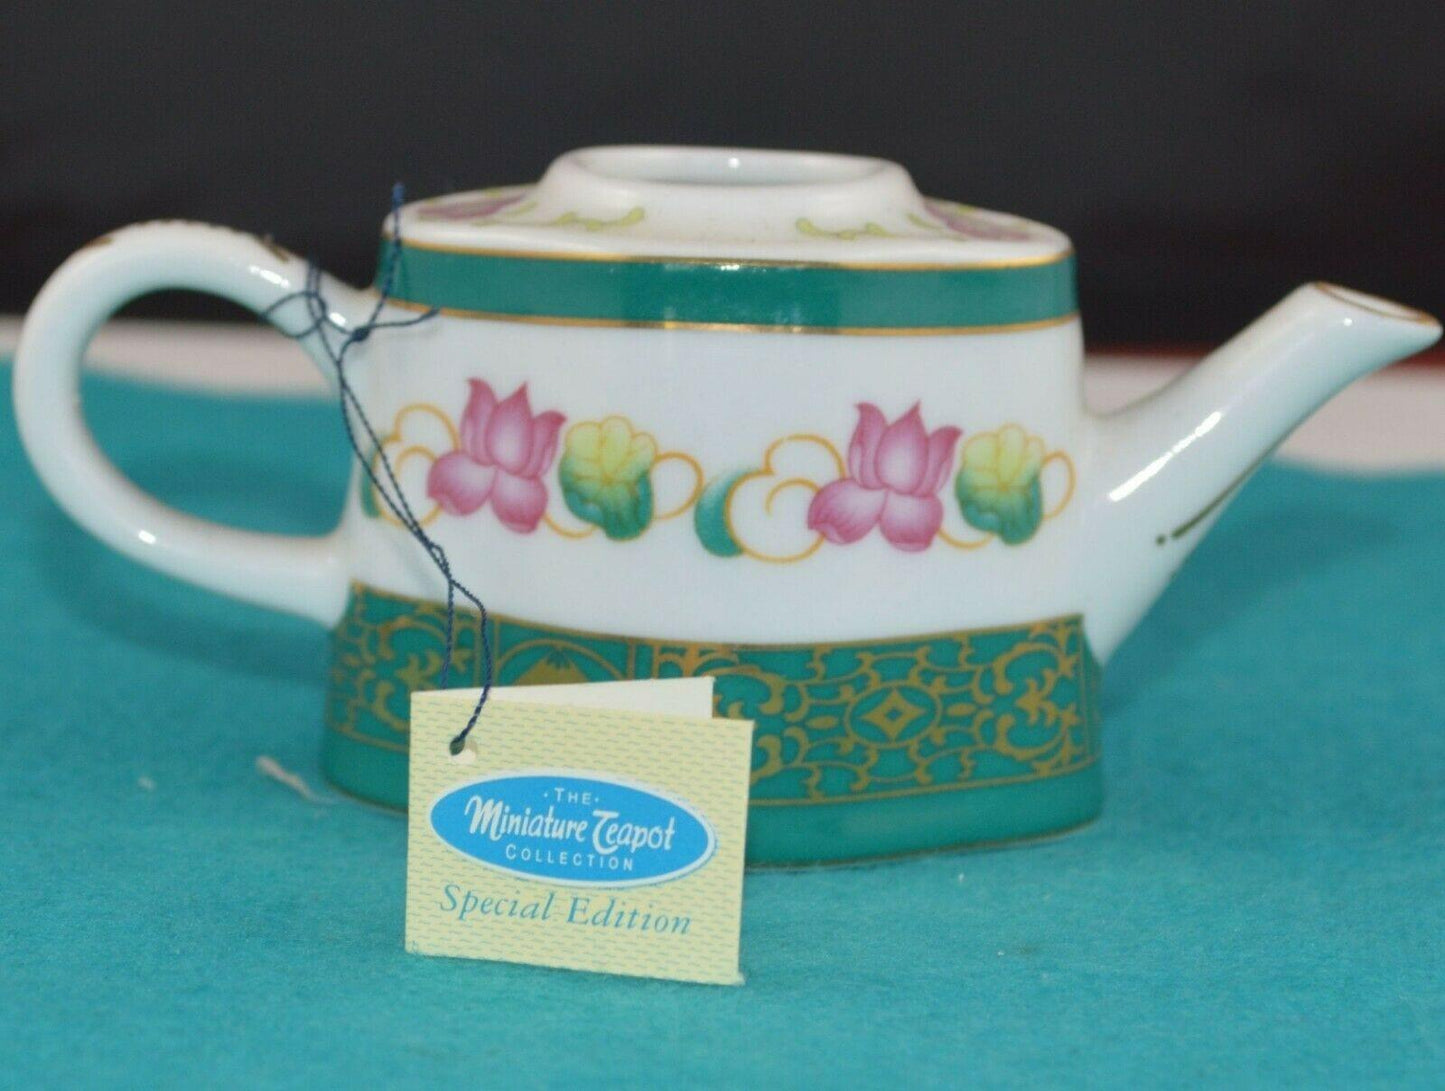 PORCELAIN ART THE MINIATURE TEAPOT COLLECTION WITH GREEN LID AND PINK FLOWERS HAS TAG(PREVIOUSLY OWNED)  - TMD167207